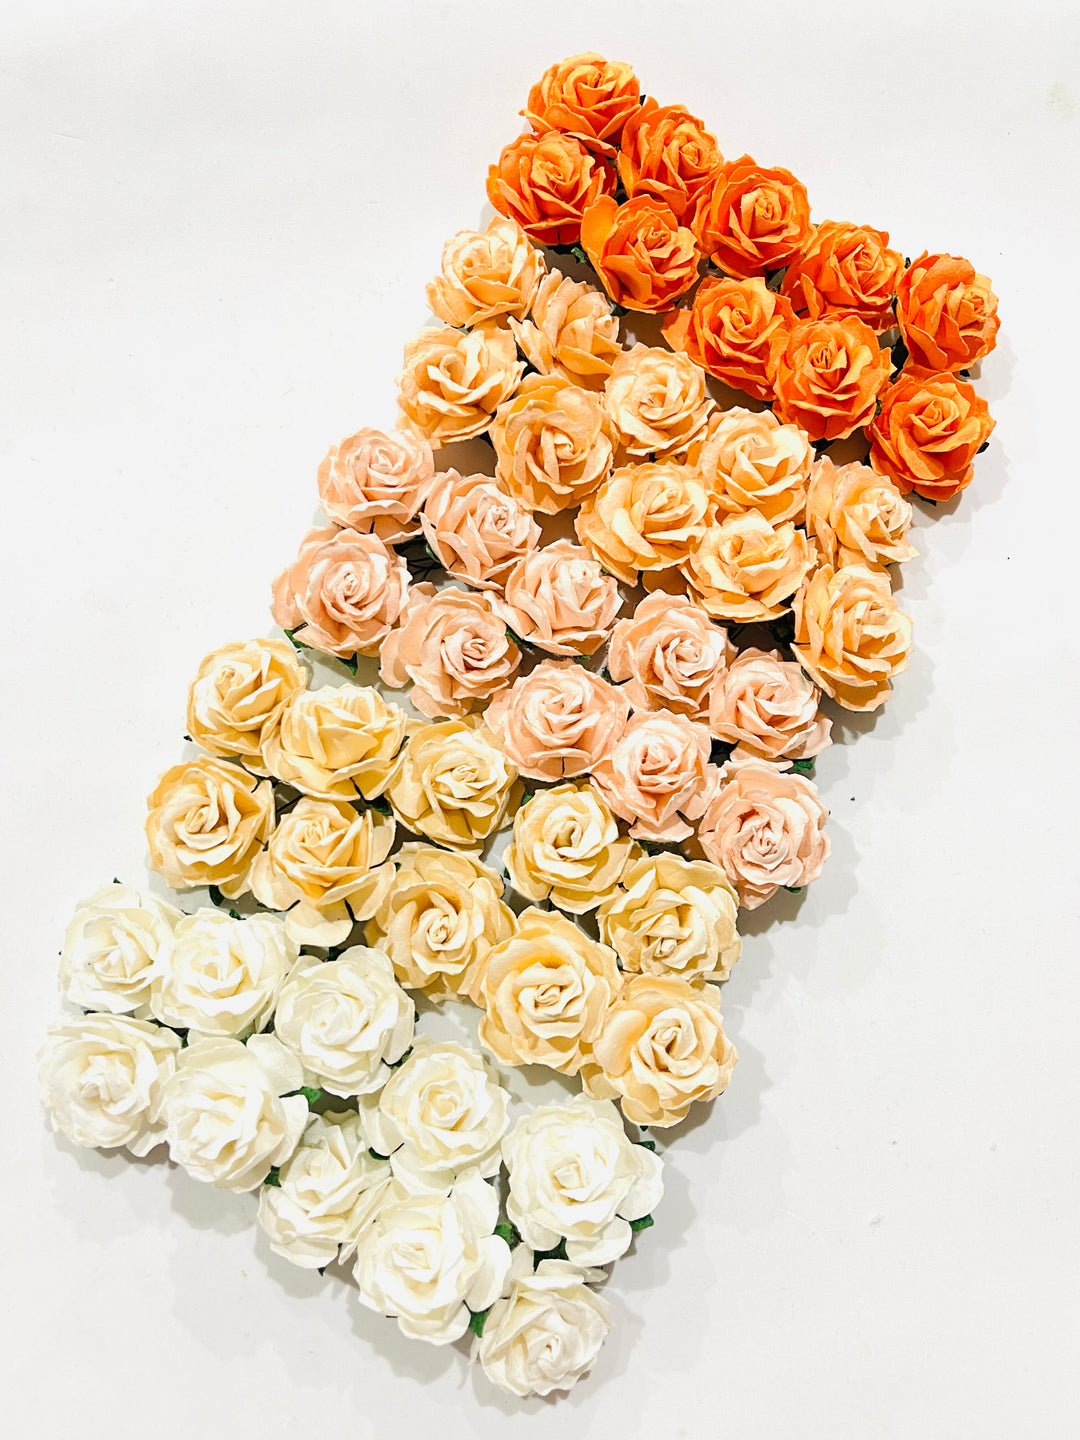 50 Pack 30mm Mixed Apricot Orange Wild Roses Mulberry Paper Roses (10 Colours, 5 Stem per colour)